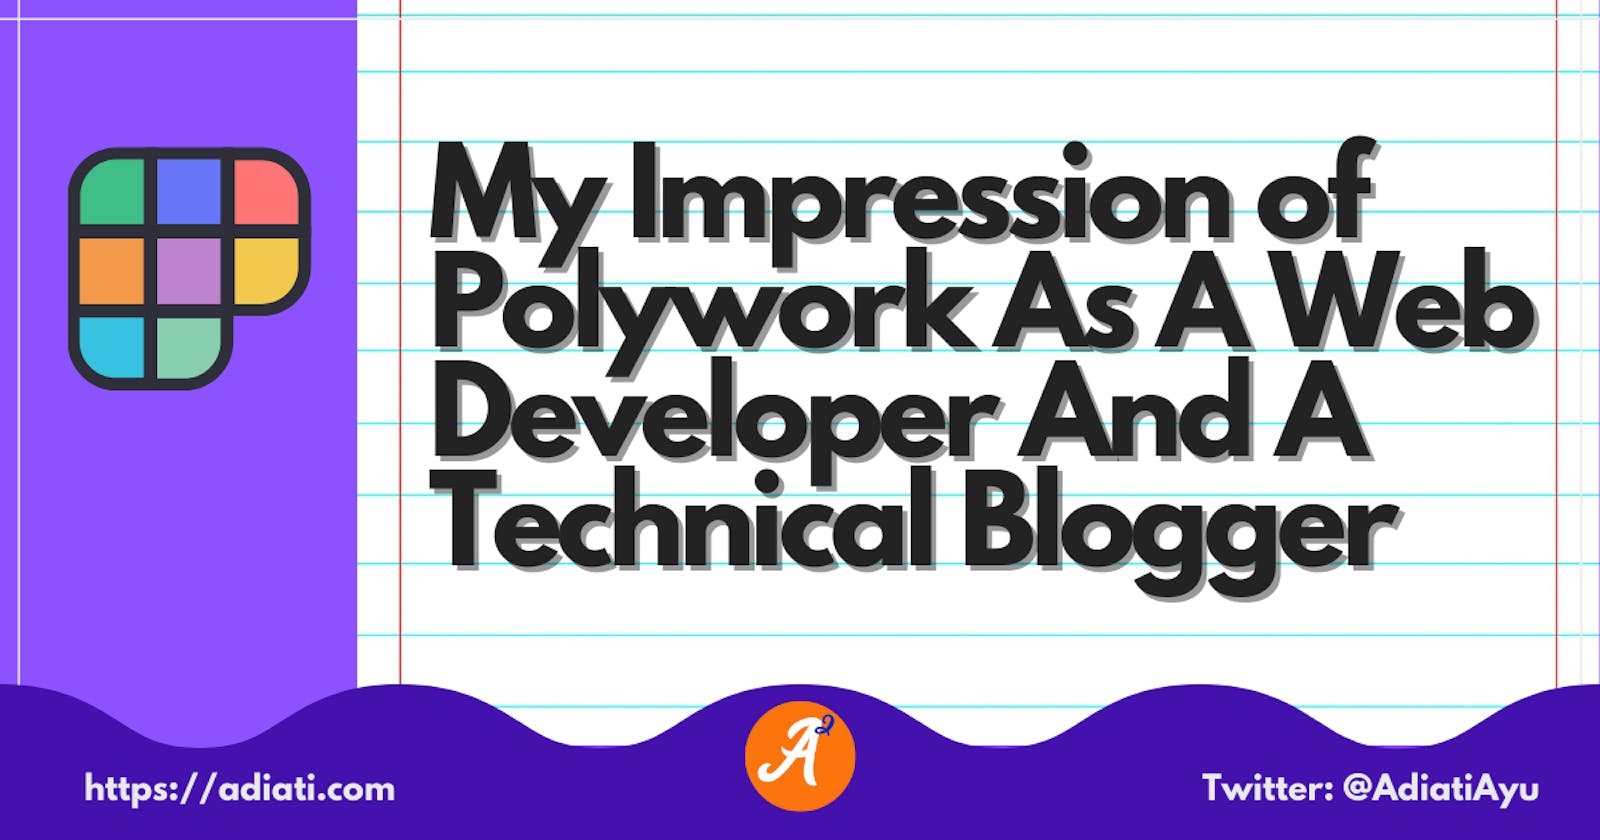 My Impression of Polywork As A Web Developer And A Technical Blogger